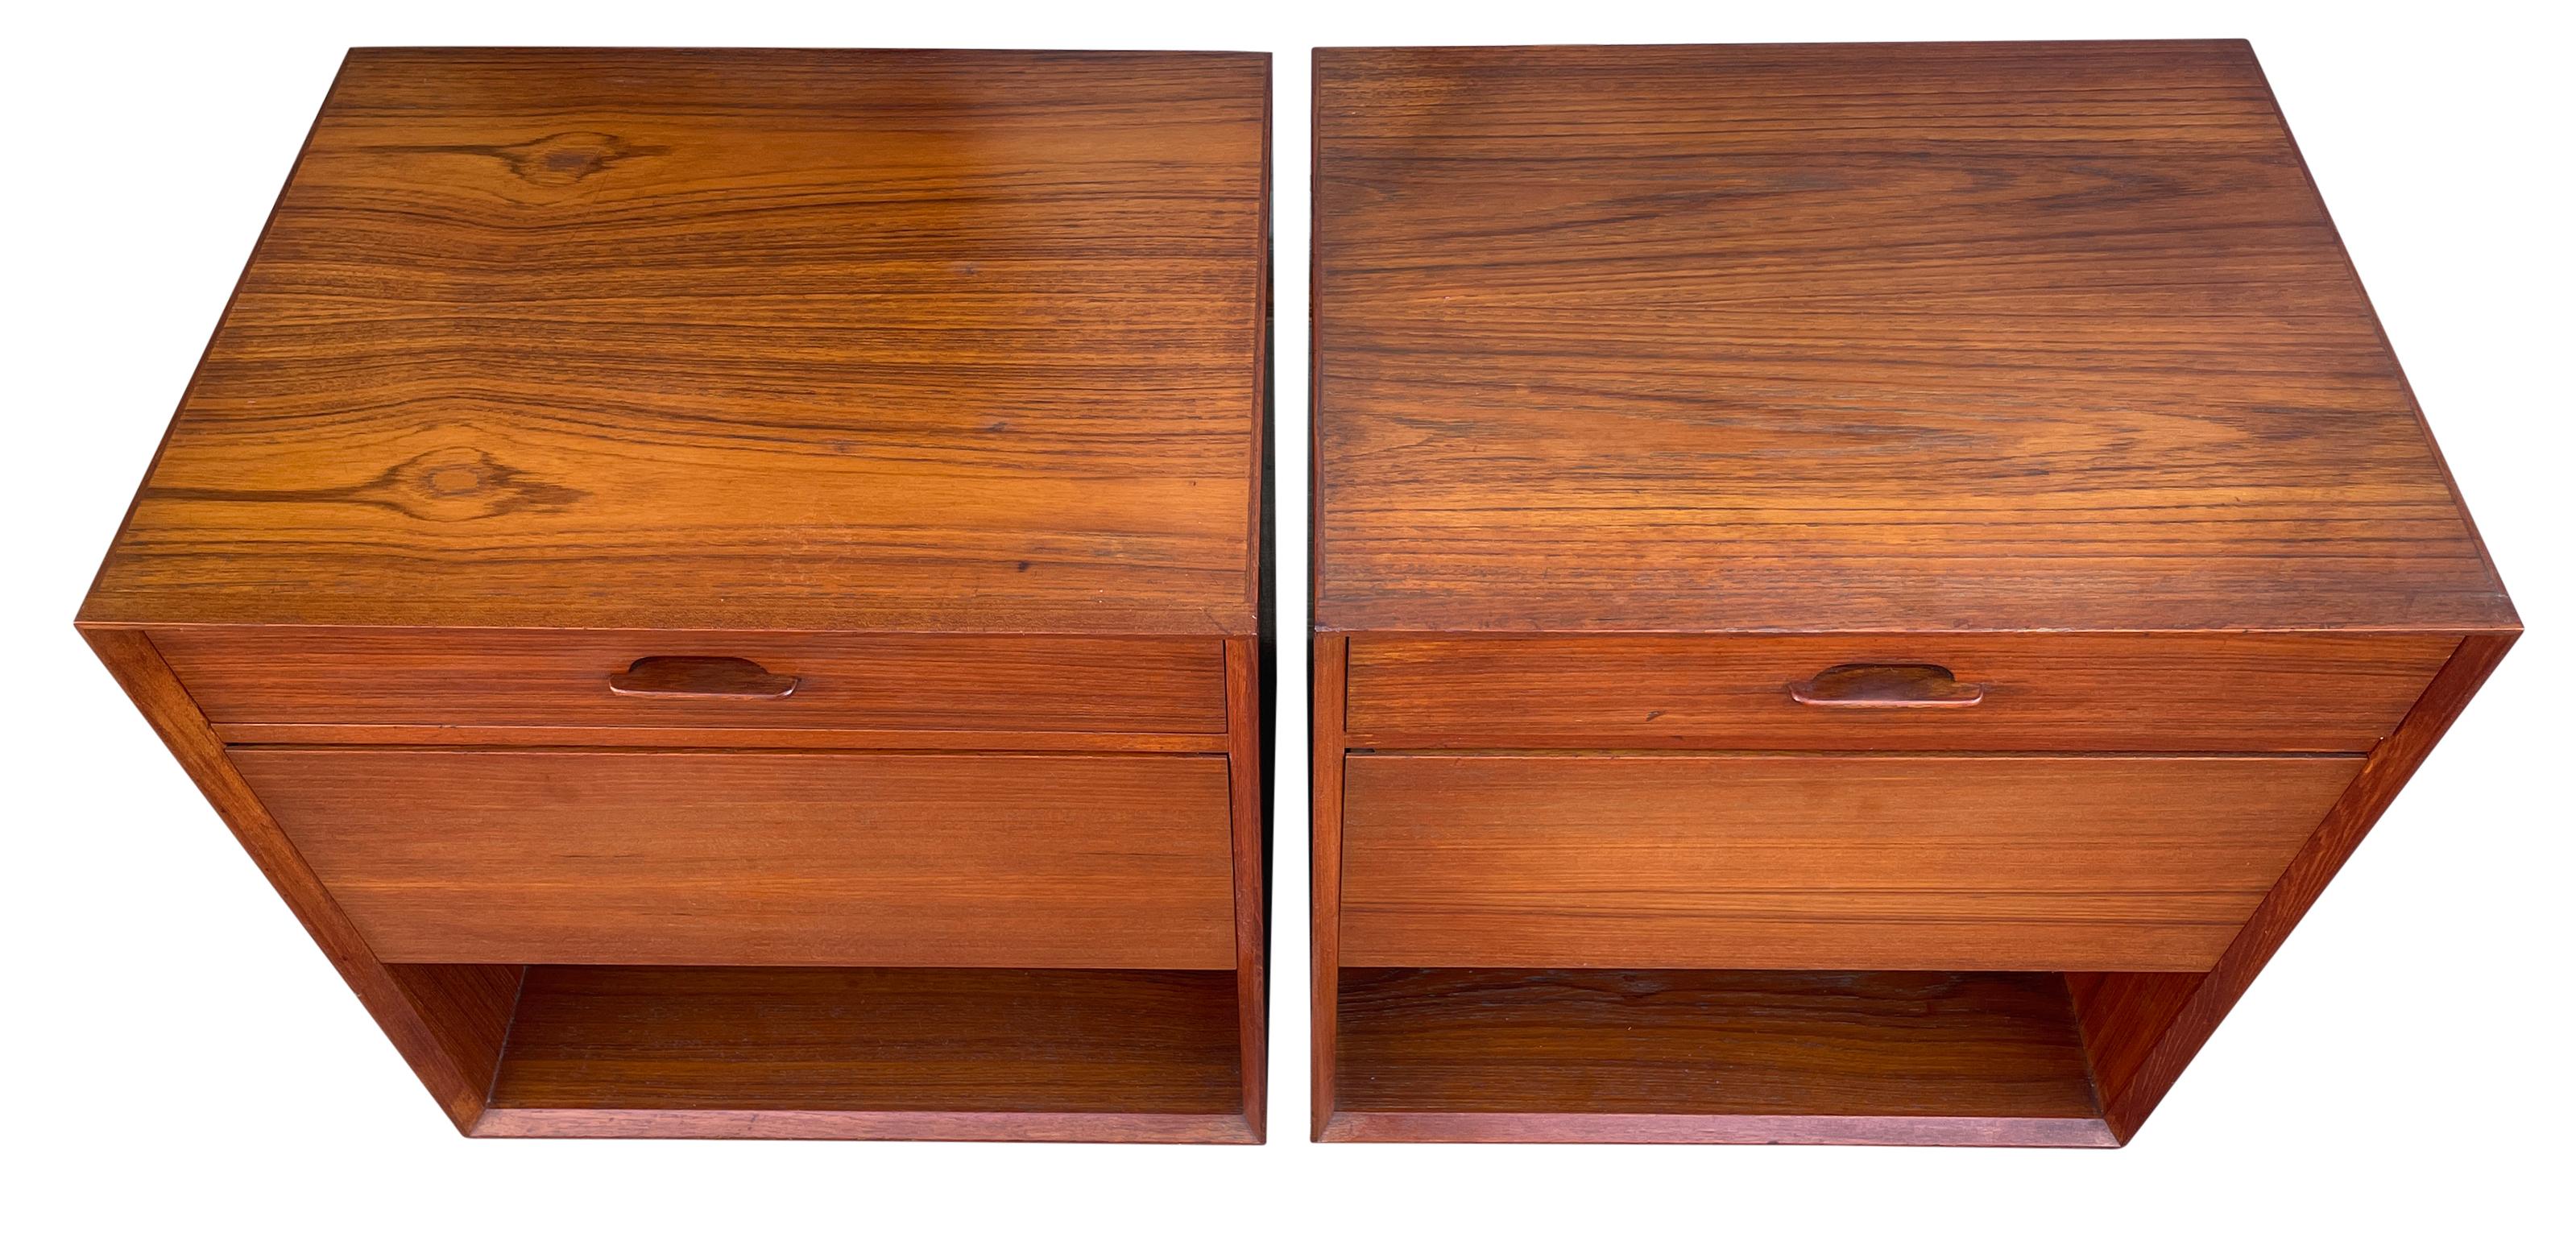 Pair of mid century Danish modem teak floating nightstands wall mount. Beautiful teak construction with 1 top narrow drawer with carved handle also has a large lower pull out drawer. Below the drawers is an open space for storage. Very stunning set